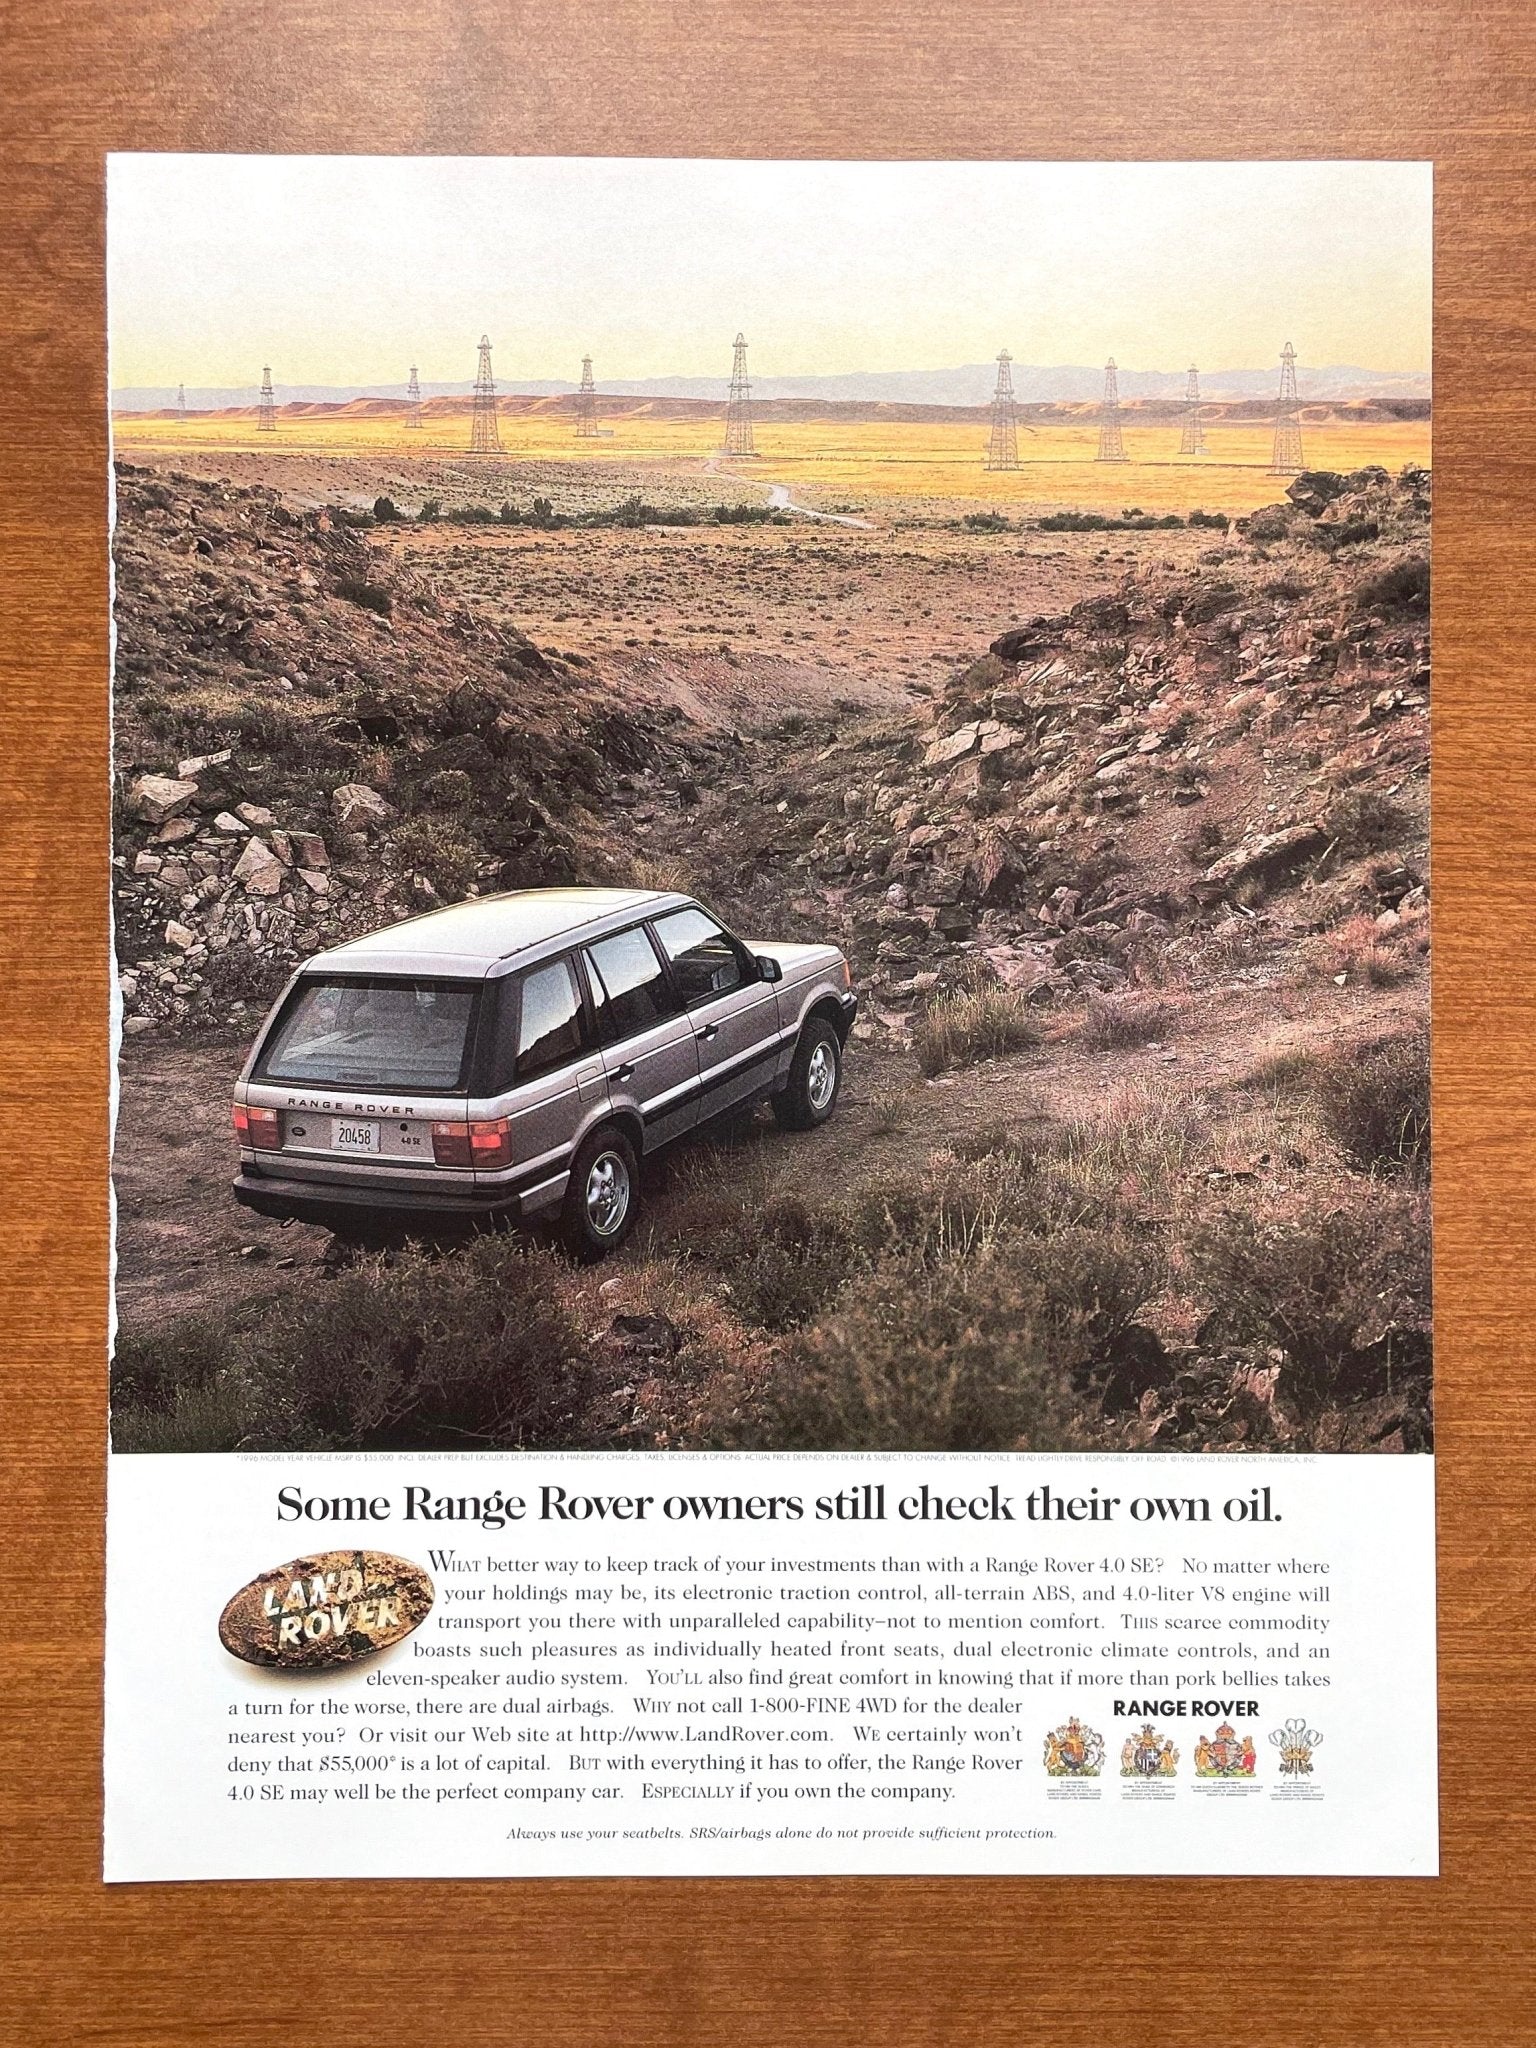 1996 Range Rover 4.0 SE "owners check their own oil." Advertisement